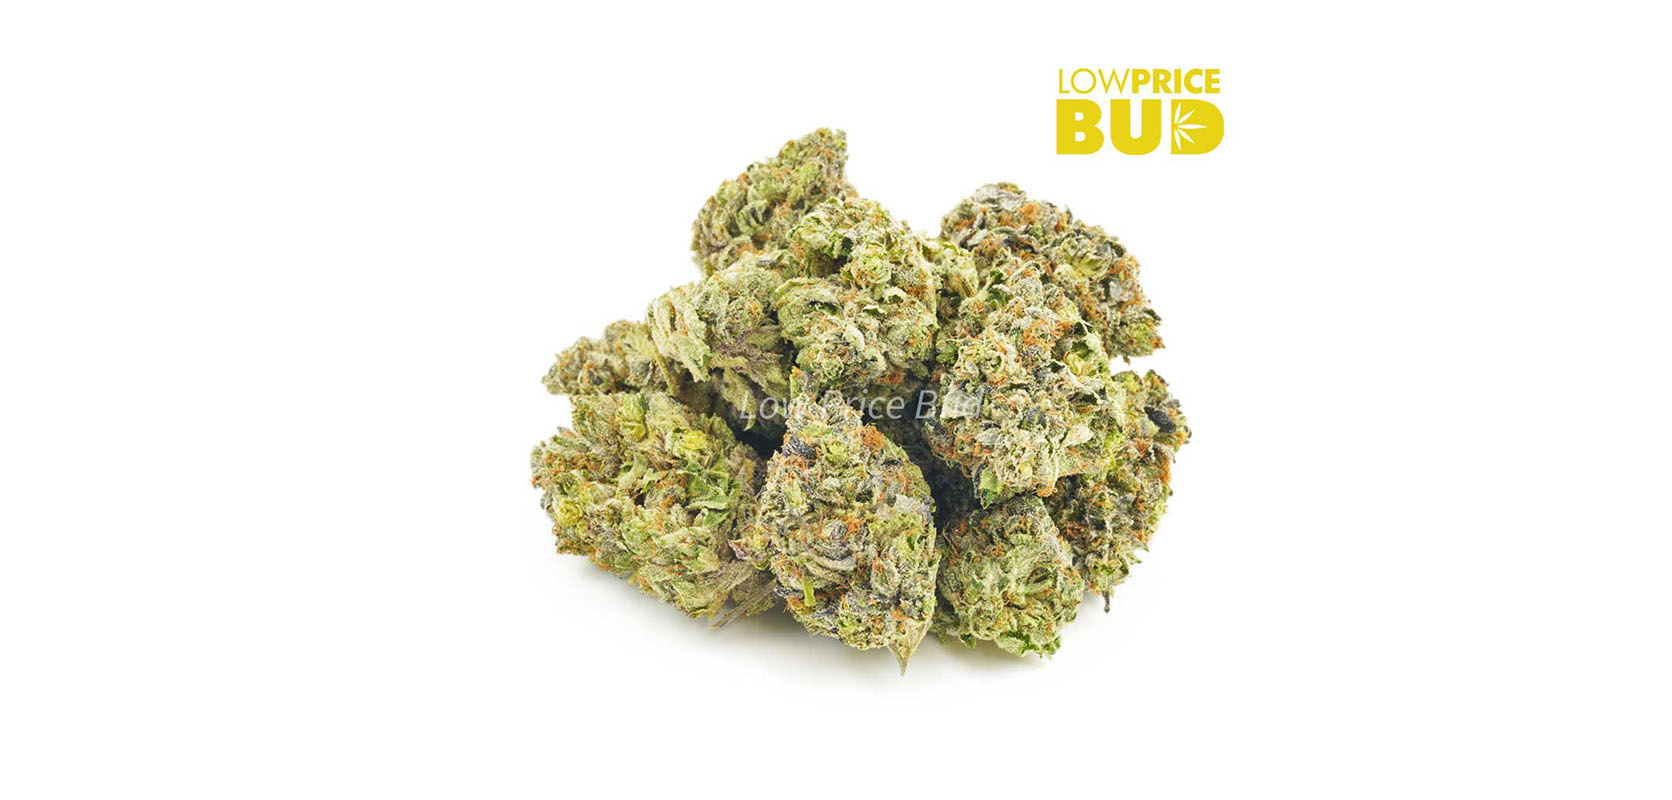 buy weed Gelato Strain from the top mail order marijuana online dispensary in Canada low price bud.